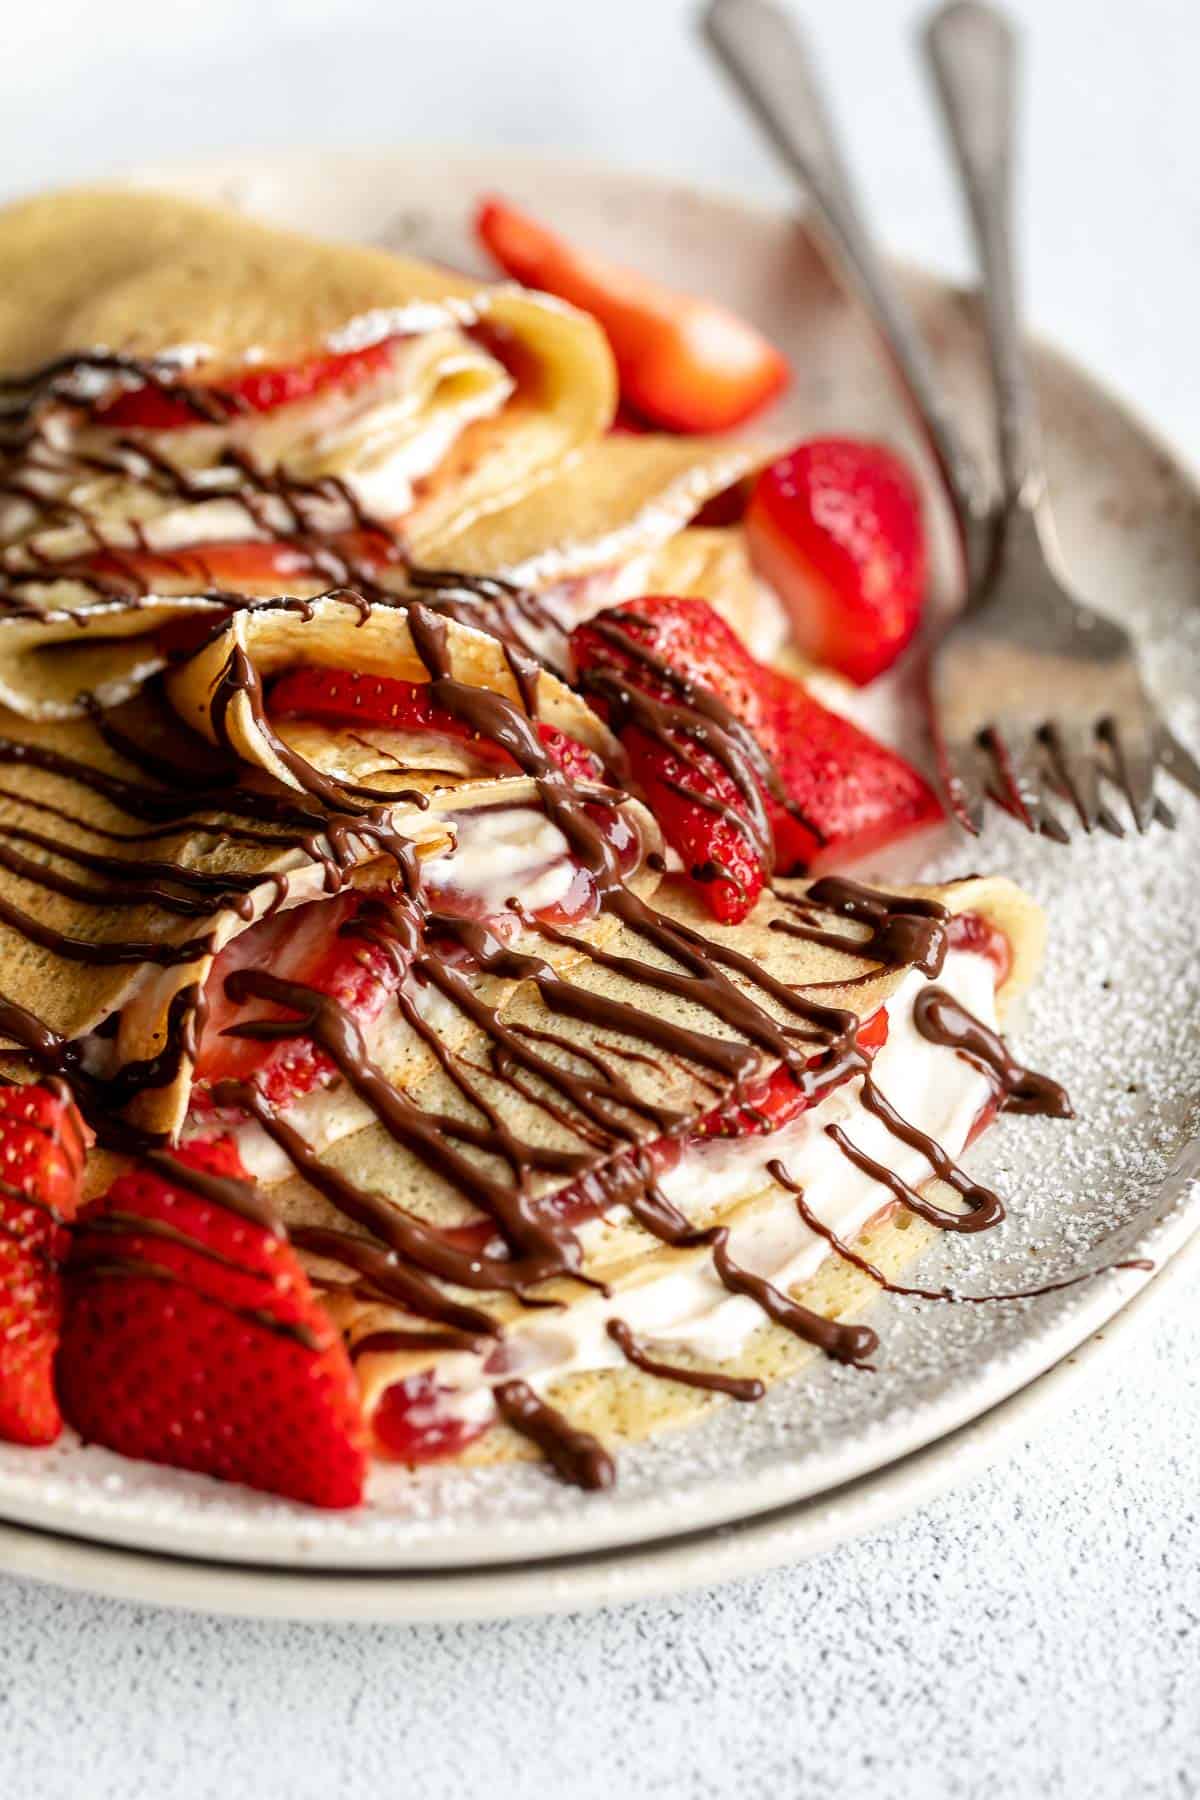 up close image of the crepes on a plate with berries and chocolate